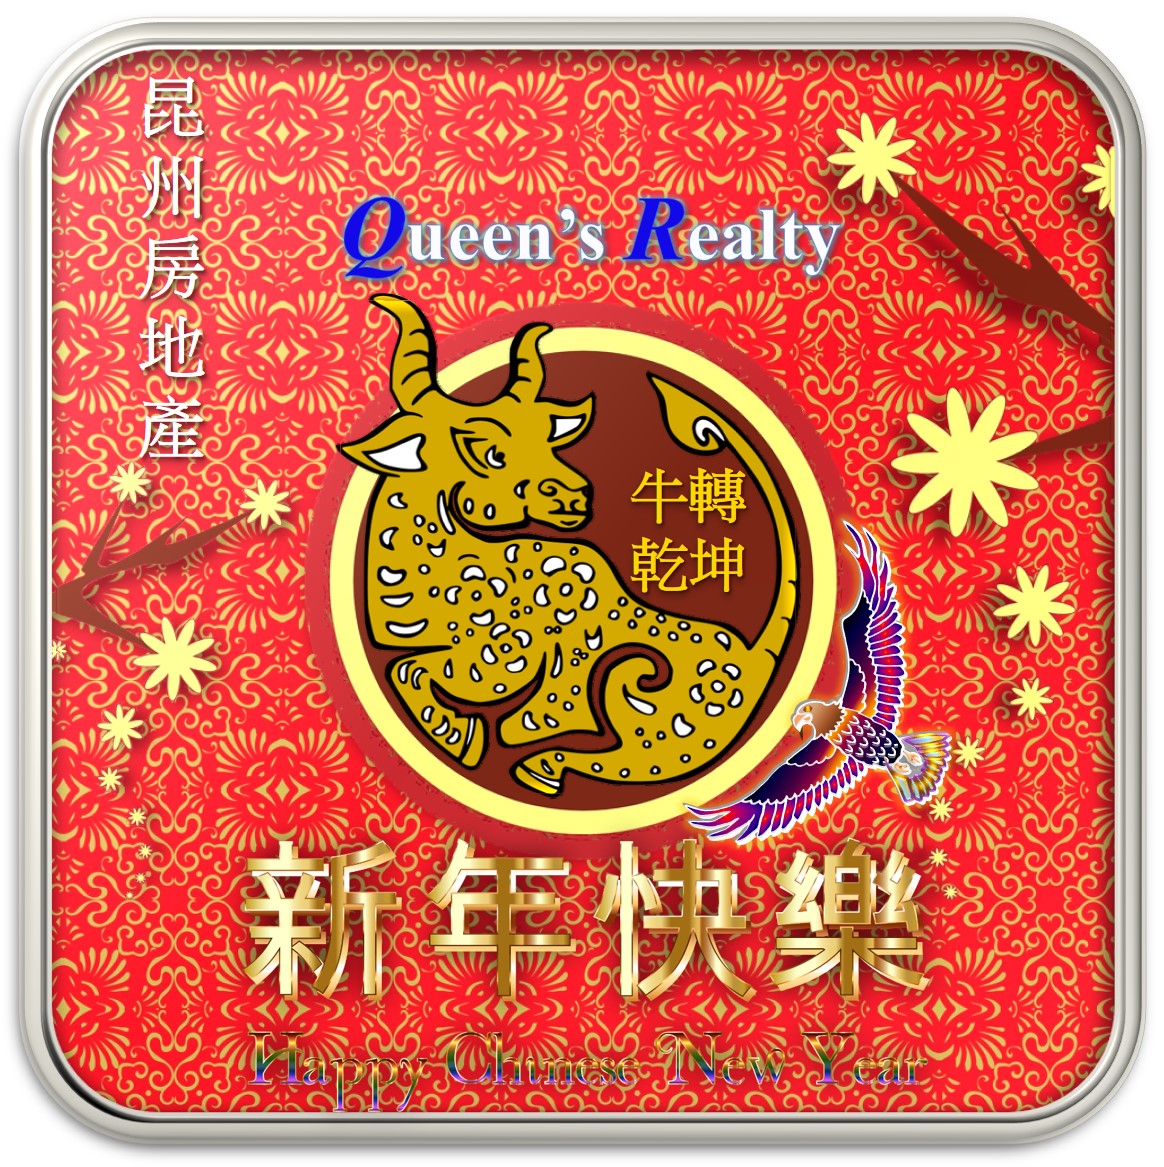 Happy Chinese New Year 2021 from Queen's Realty